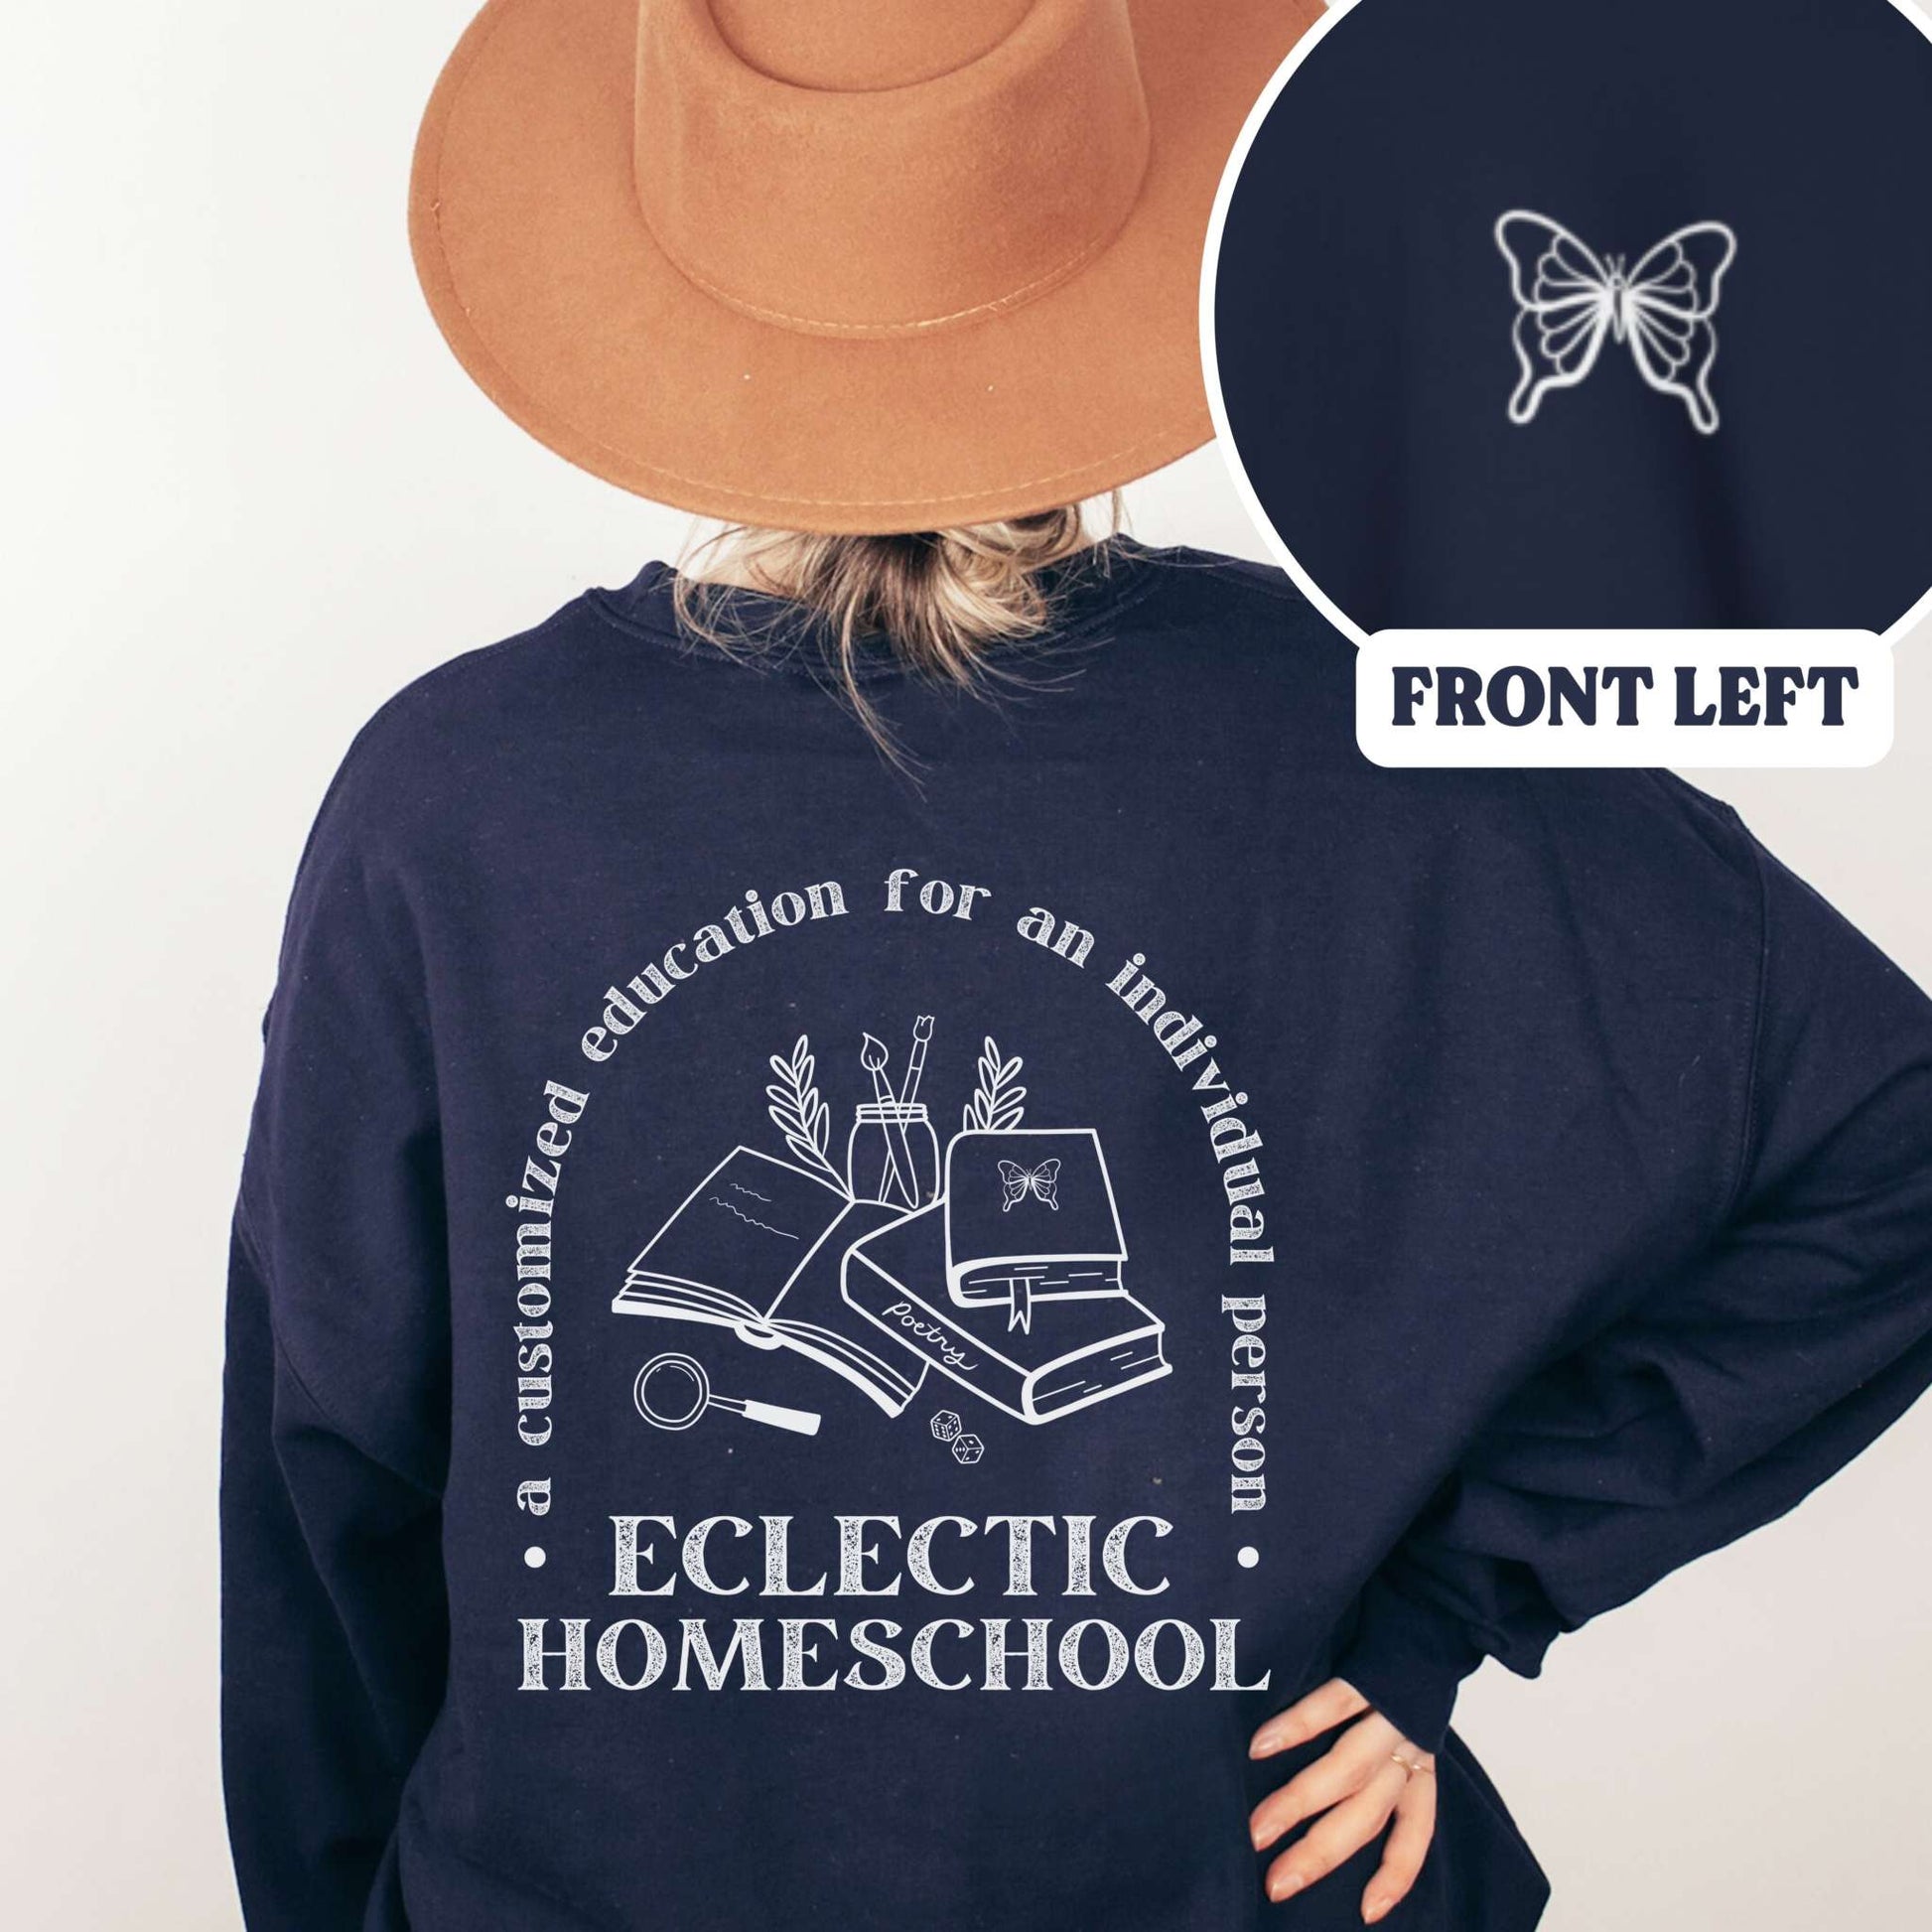 Eclectic Homeschool Crewneck SweatshirtWolfe Paw DesignsEclectic Homeschool Crewneck SweatshirtFinally, a sweater for the eclectic homeschool moms!
A customized education for an individual person 
Also in a Tee Shirt: Click Here
&amp; Hoodie: Click Here
50% coEclectic Homeschool Crewneck Sweatshirt for moms